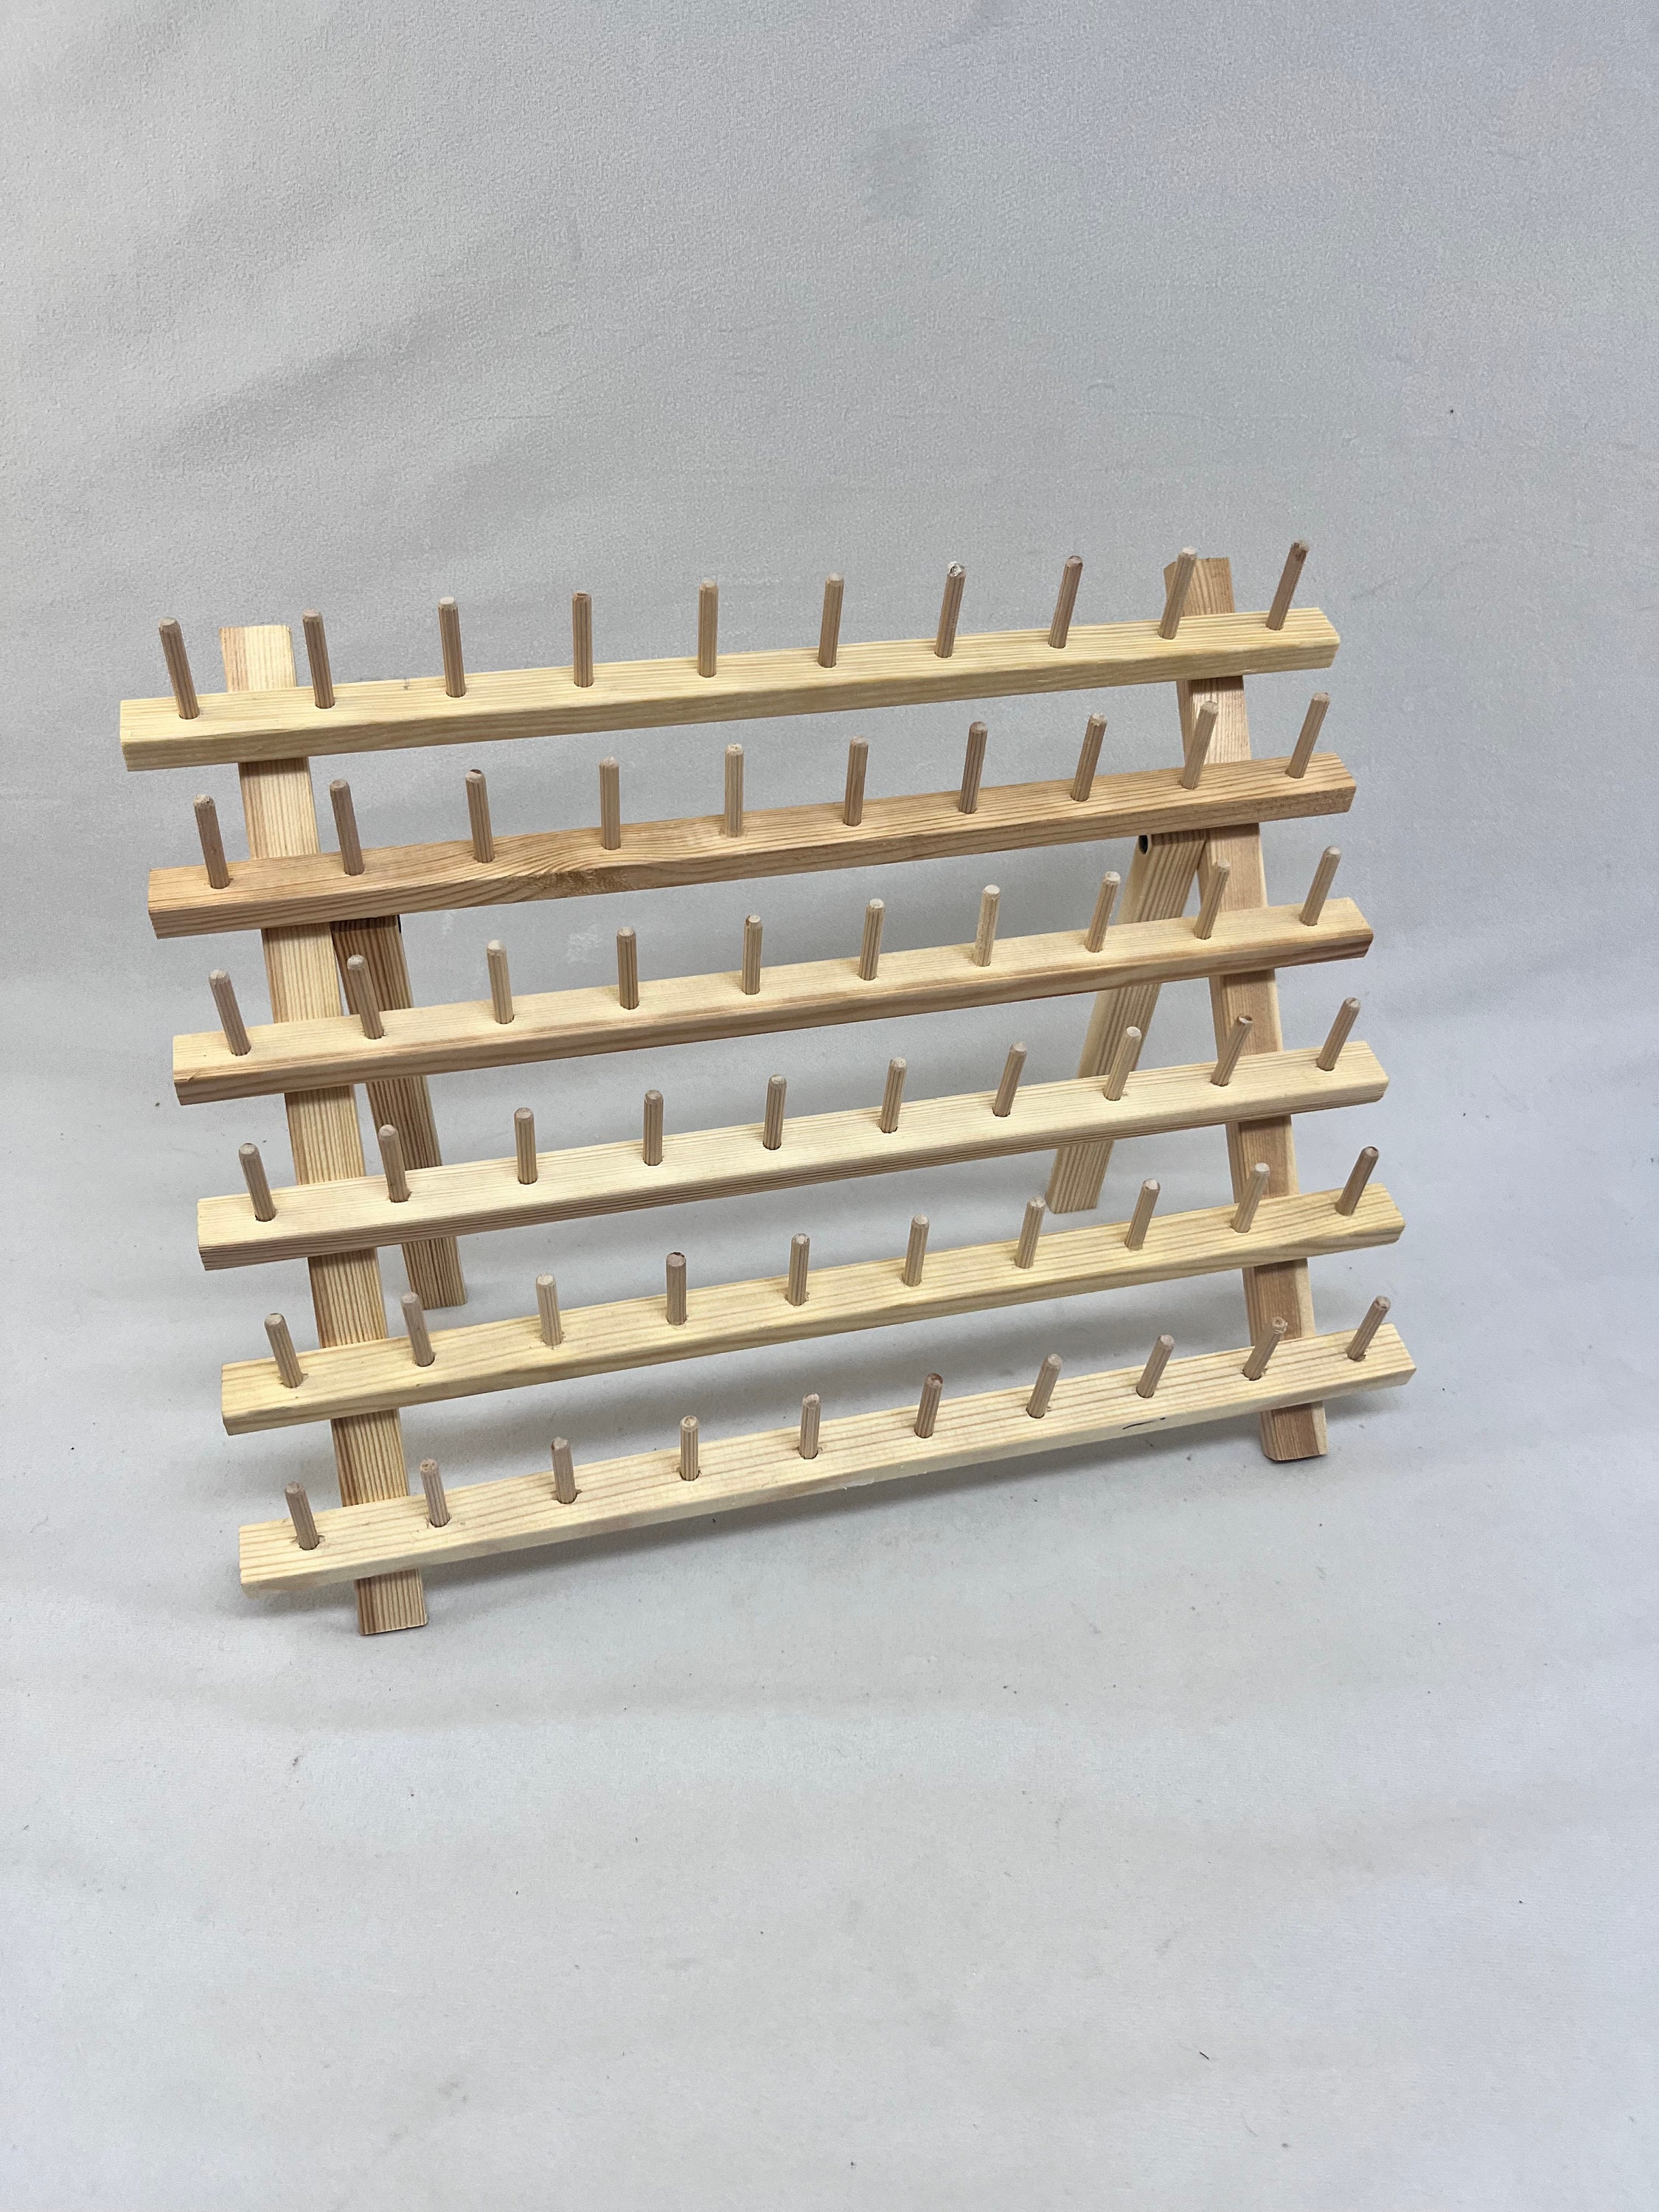 Wood Bobbin Spools 8-Reel Wooden Thread Stand Holder Sewing